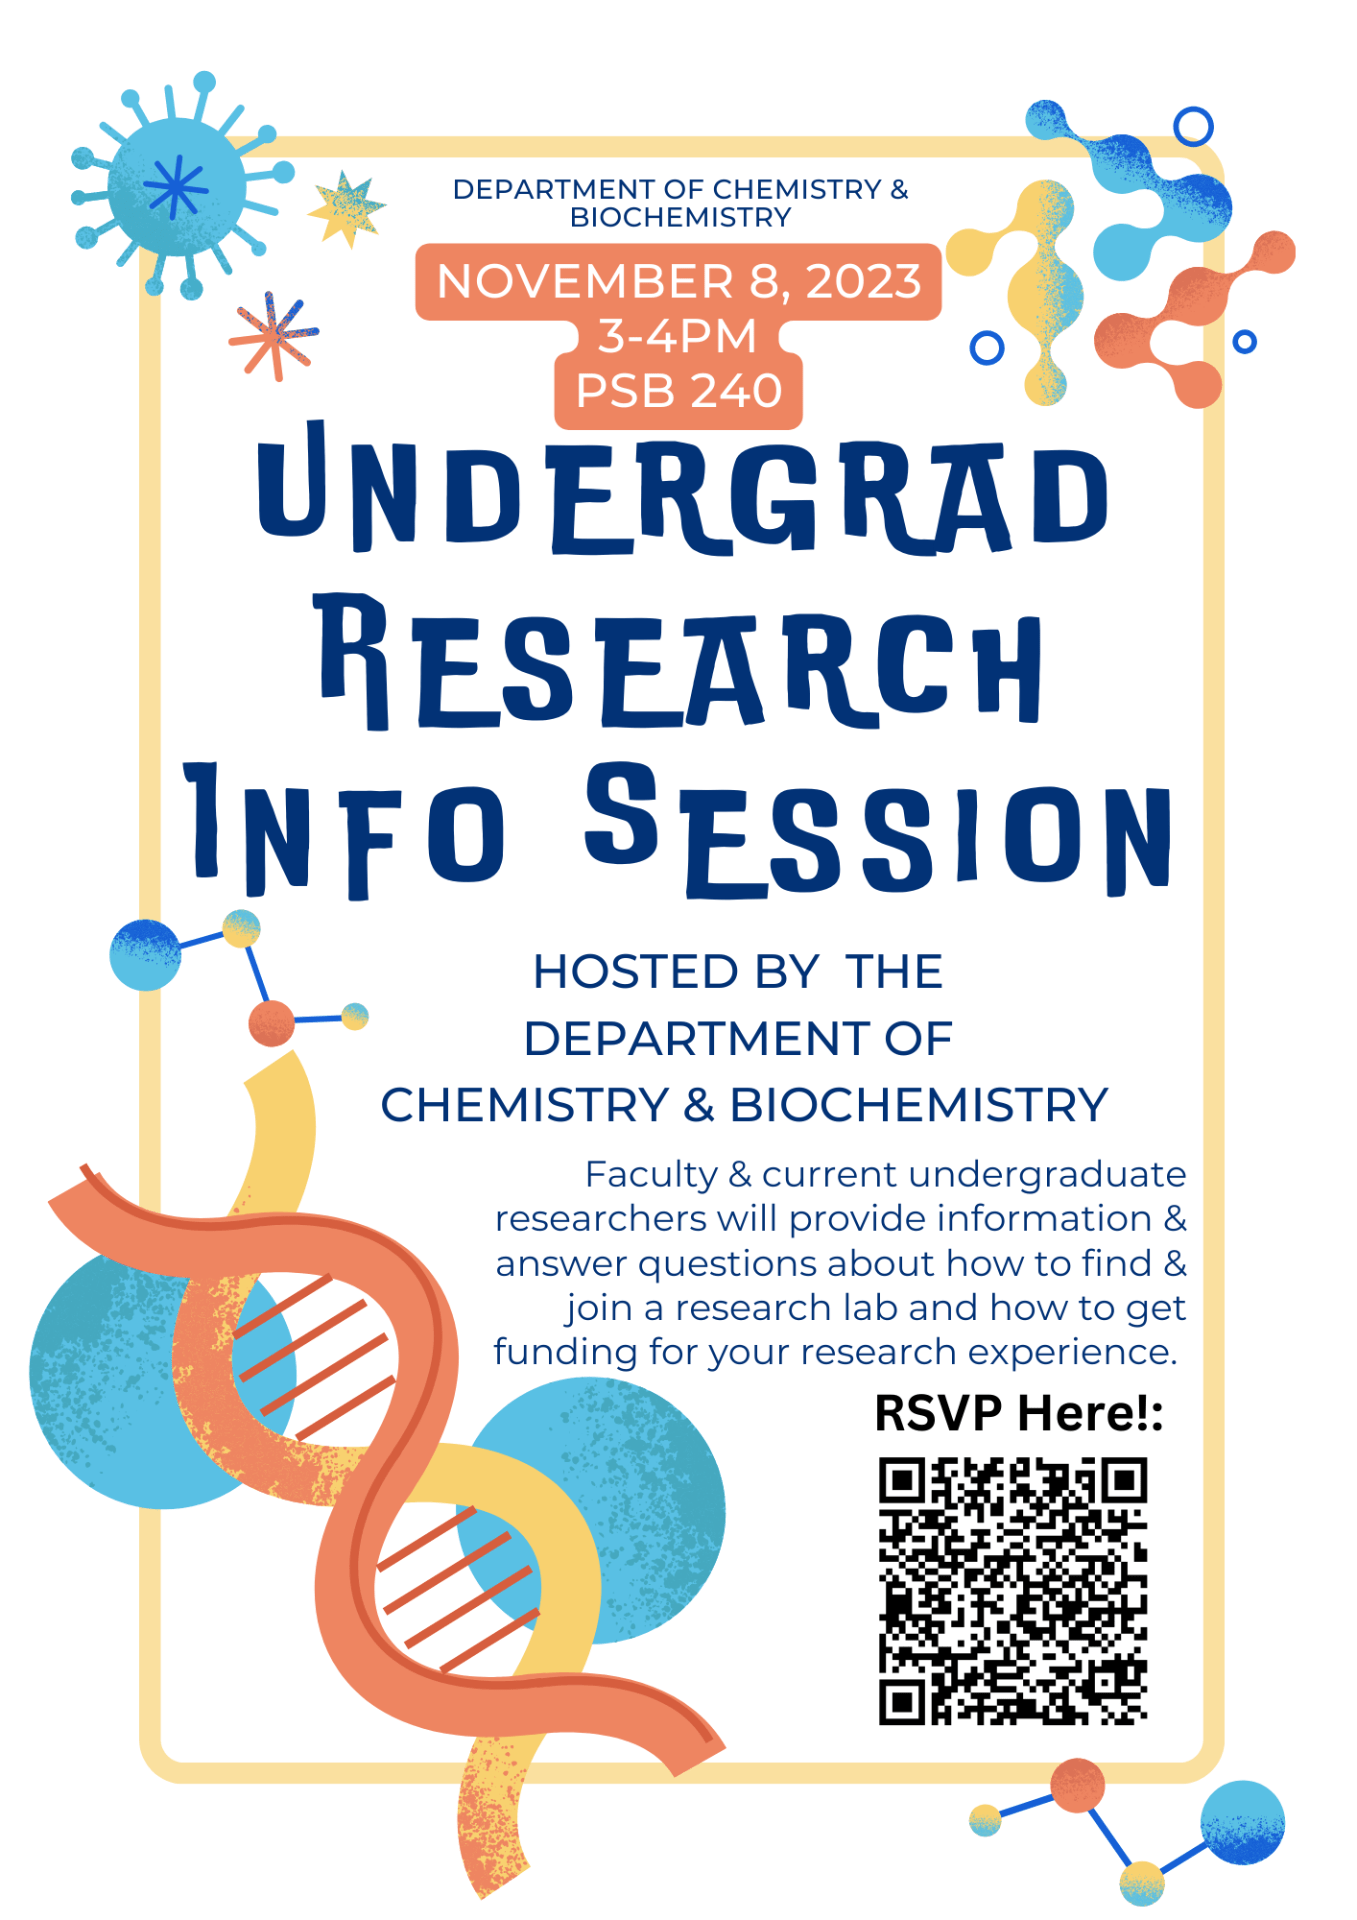 Undergrad Research Info Session Flyer